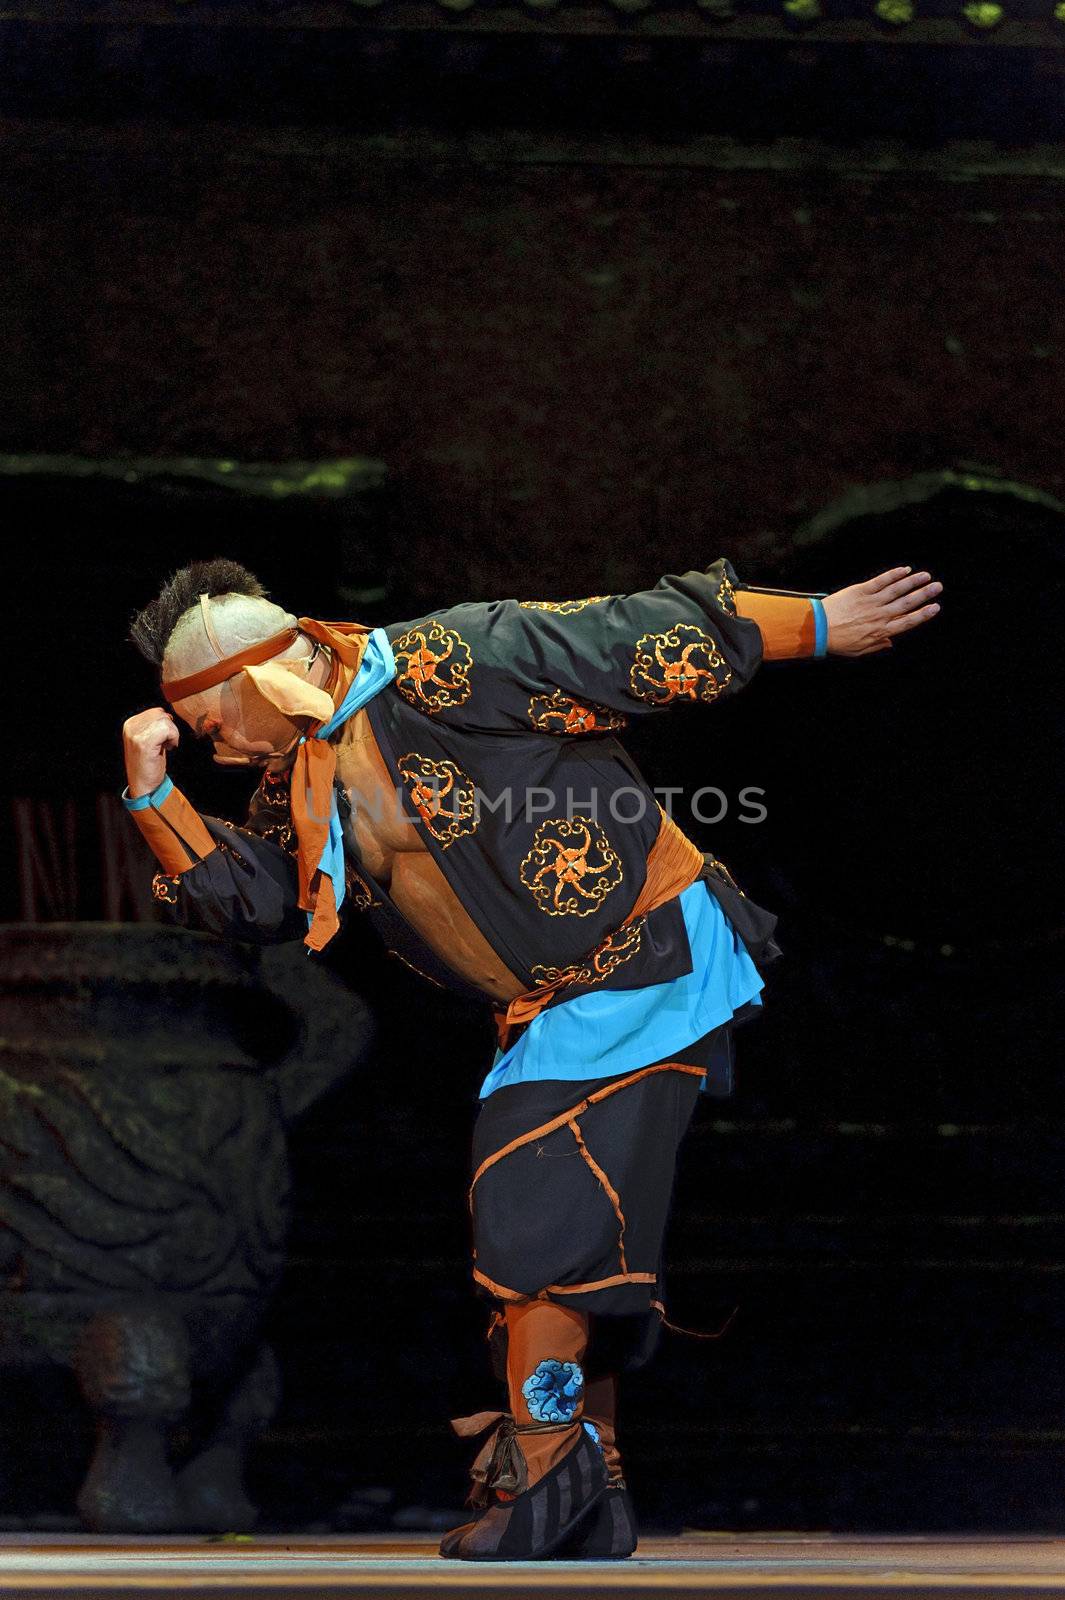 CHENGDU - JUN 8: Chinese Shao opera performer make a show on stage to compete for awards in 25th Chinese Drama Plum Blossom Award competition at Jincheng theater.Jun 8, 2011 in Chengdu, China.
Chinese Drama Plum Blossom Award is the highest theatrical award in China.